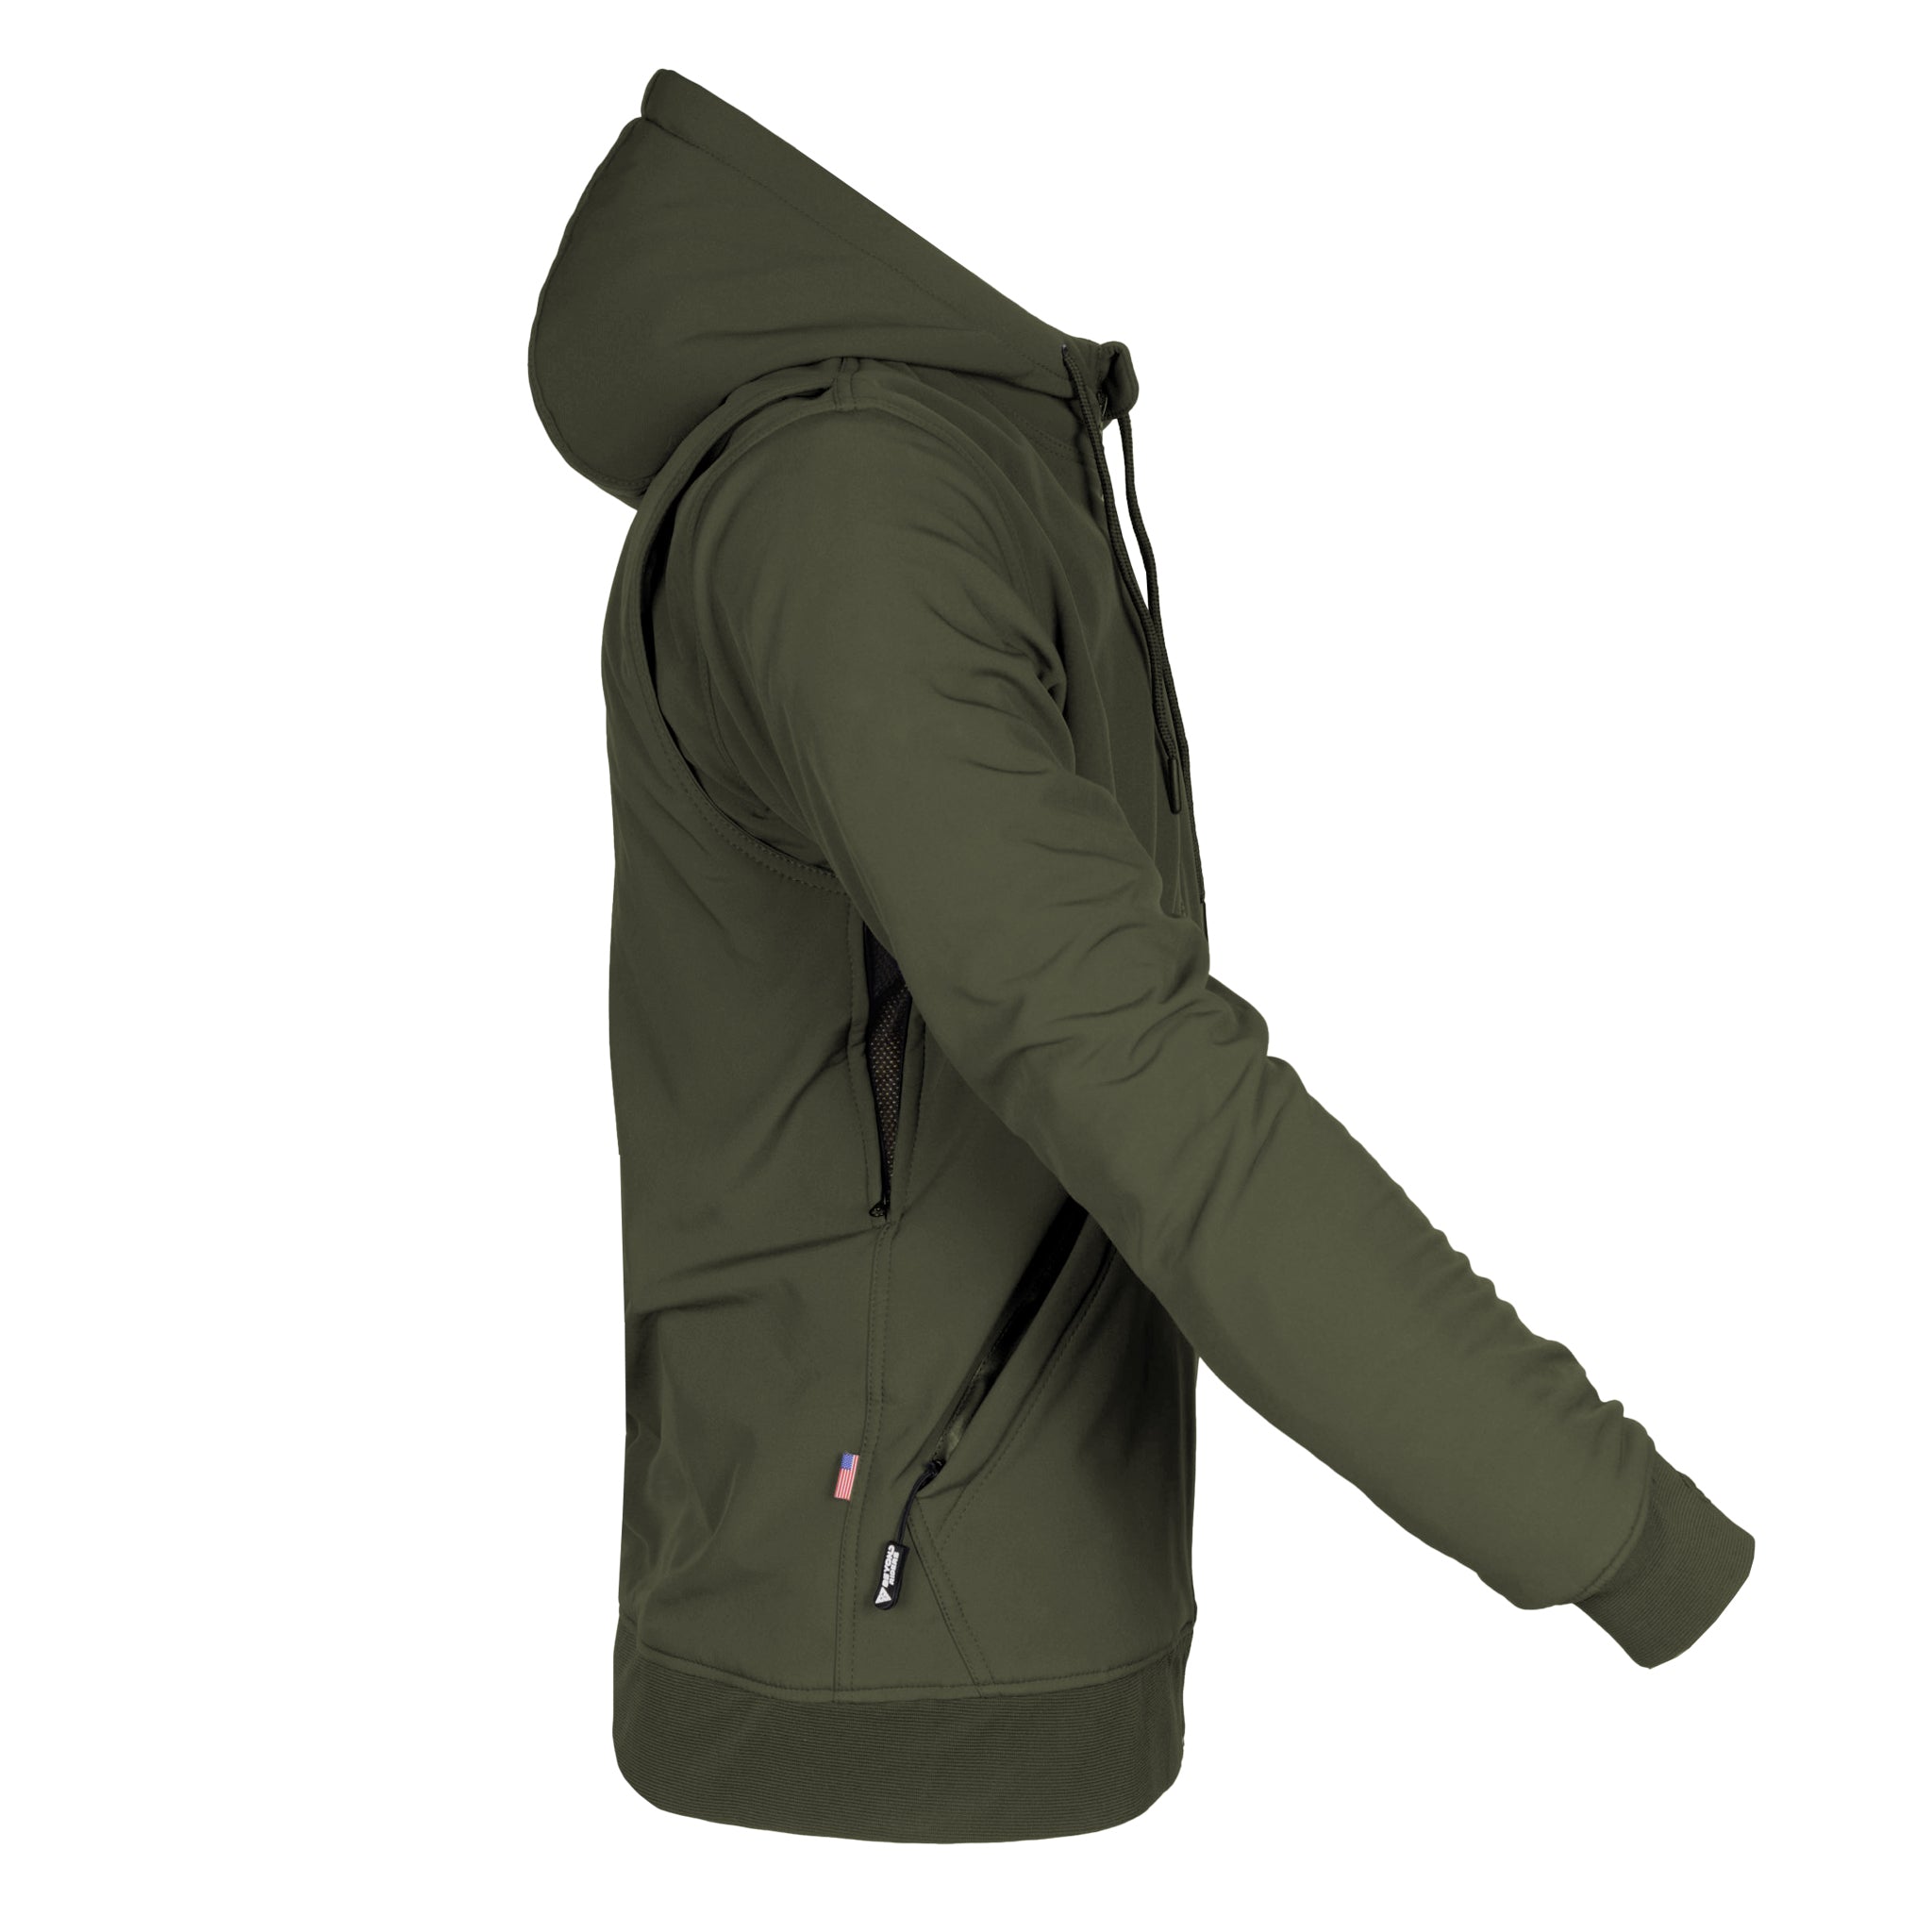 Protective SoftShell Unisex Hoodie - Army Green Matte with Pads